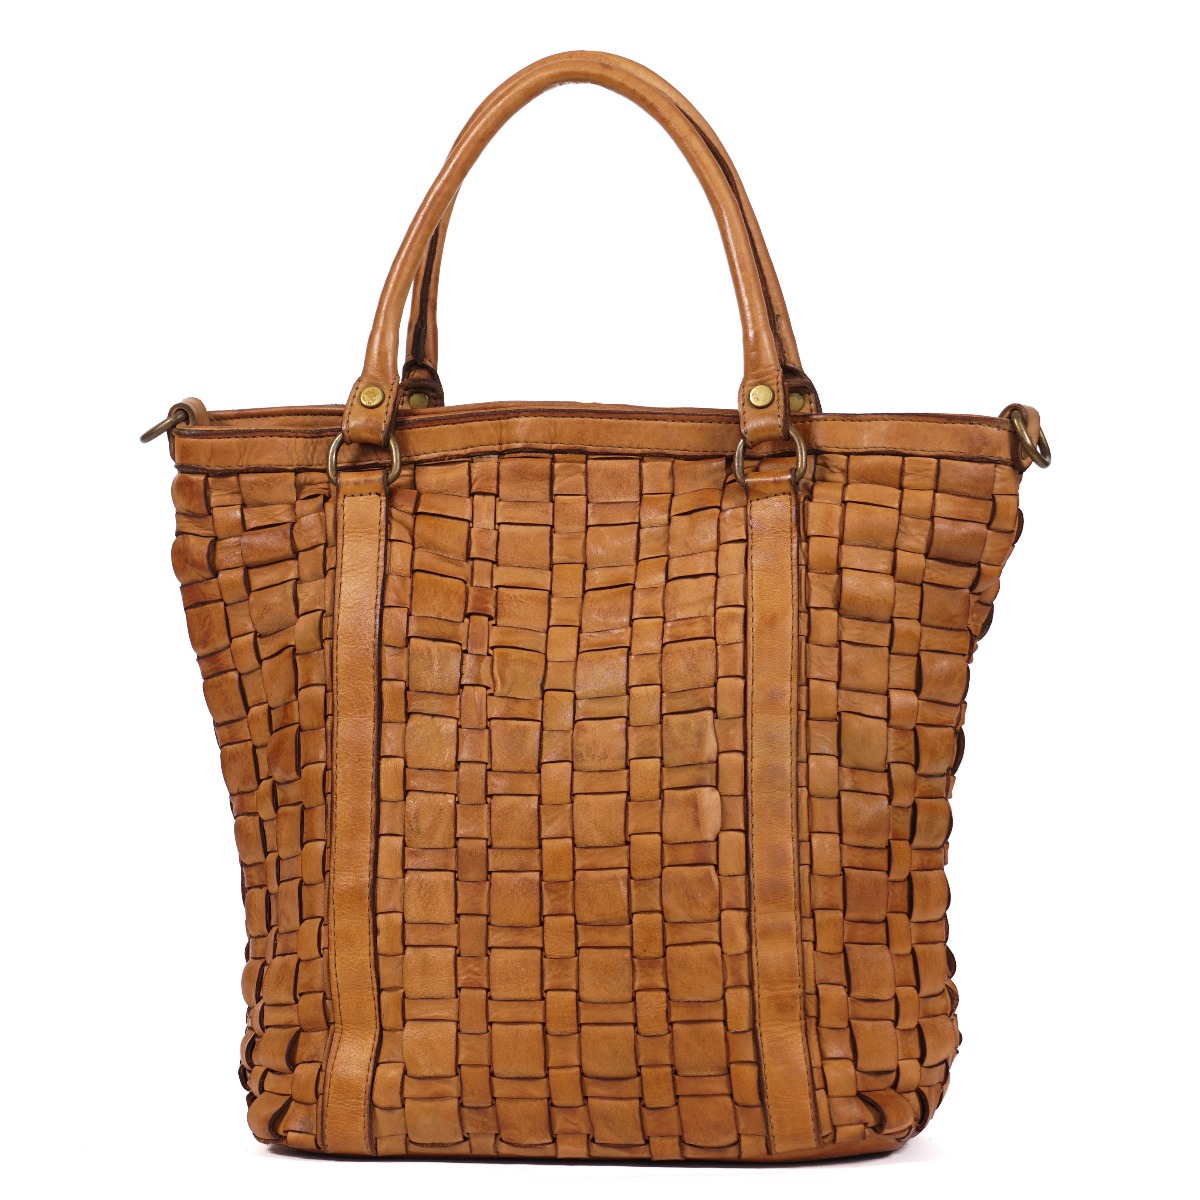 Large cognac leather tote bag